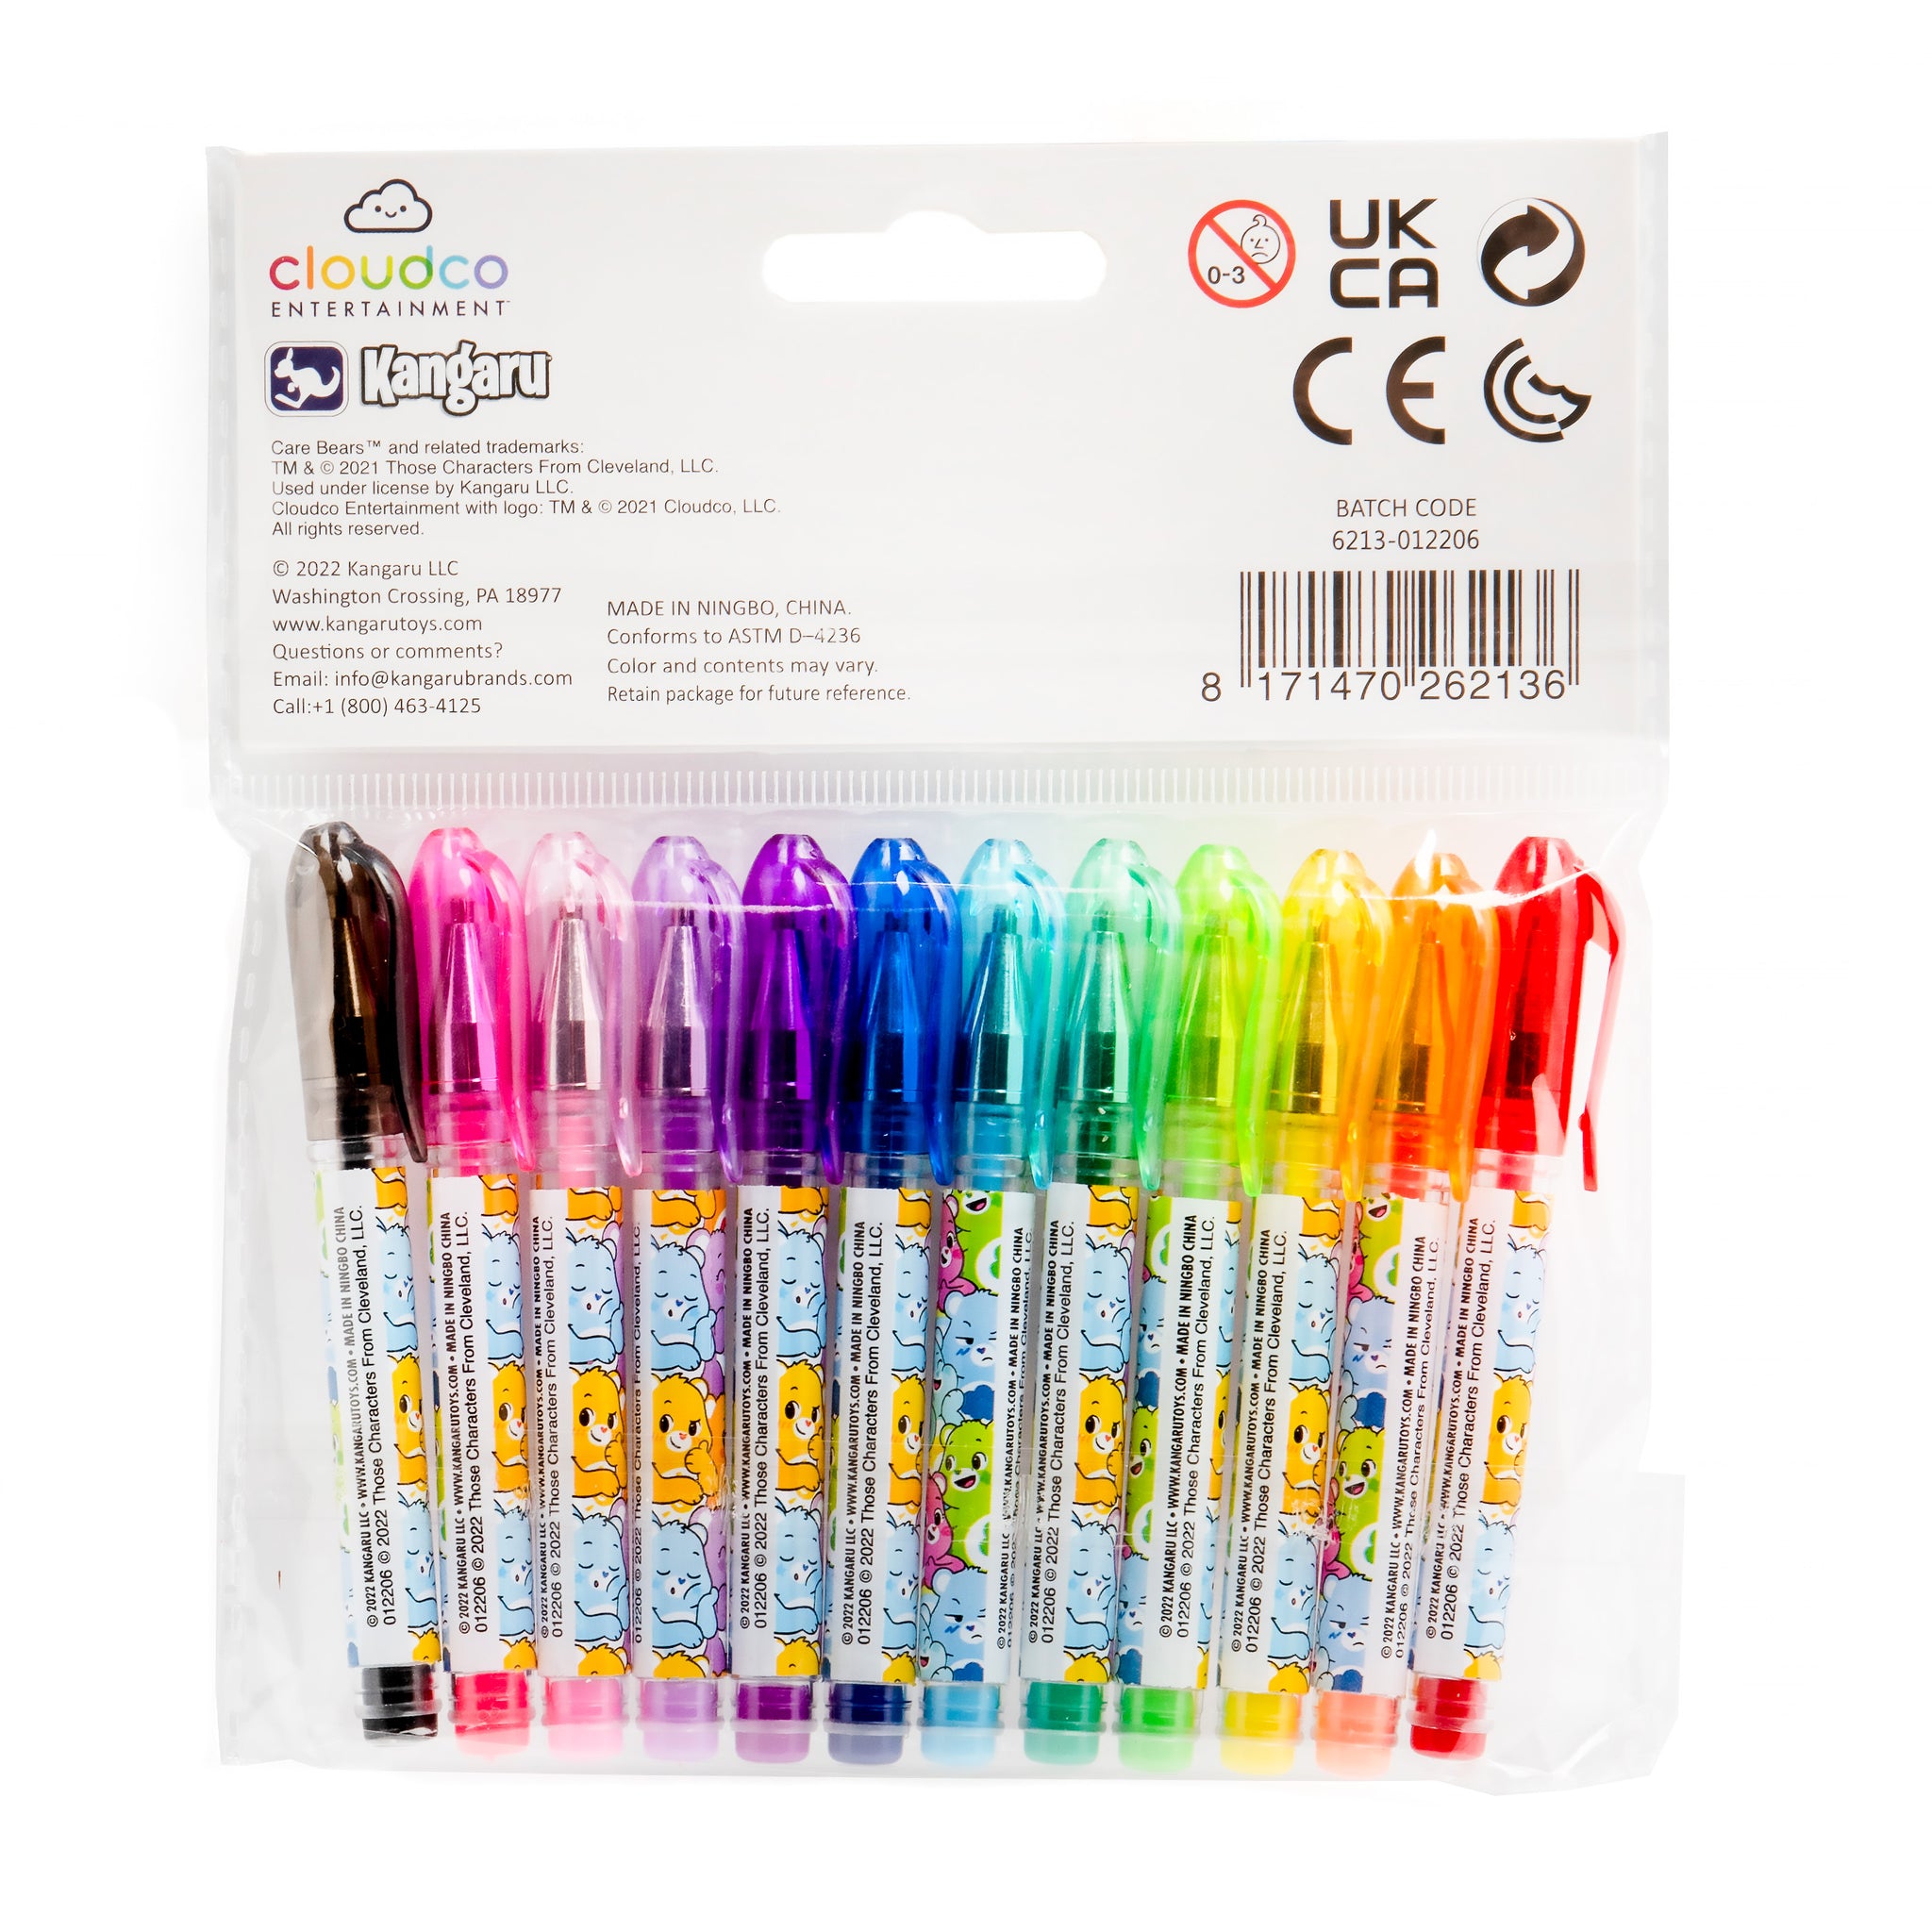 Glow-in-the-Dark Stacked Bears Pen (Stationery)